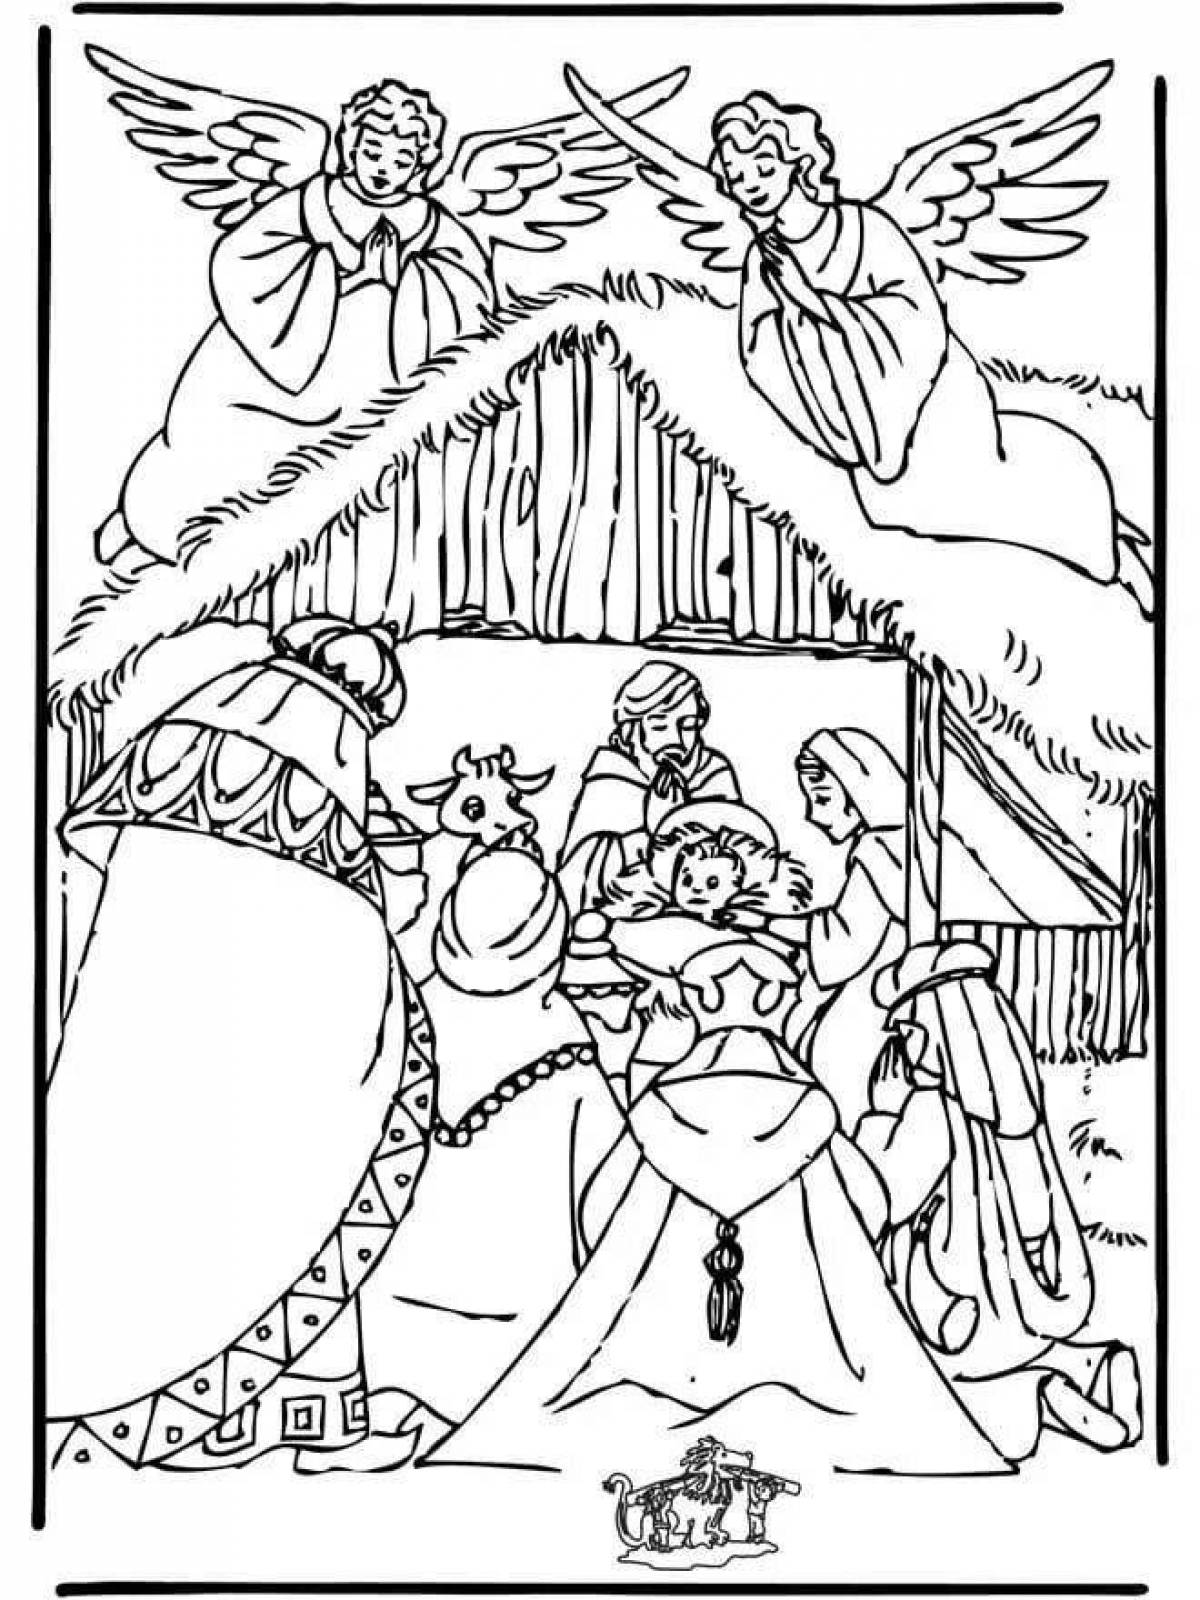 Amazing Christmas coloring pages for kids orthodoxy